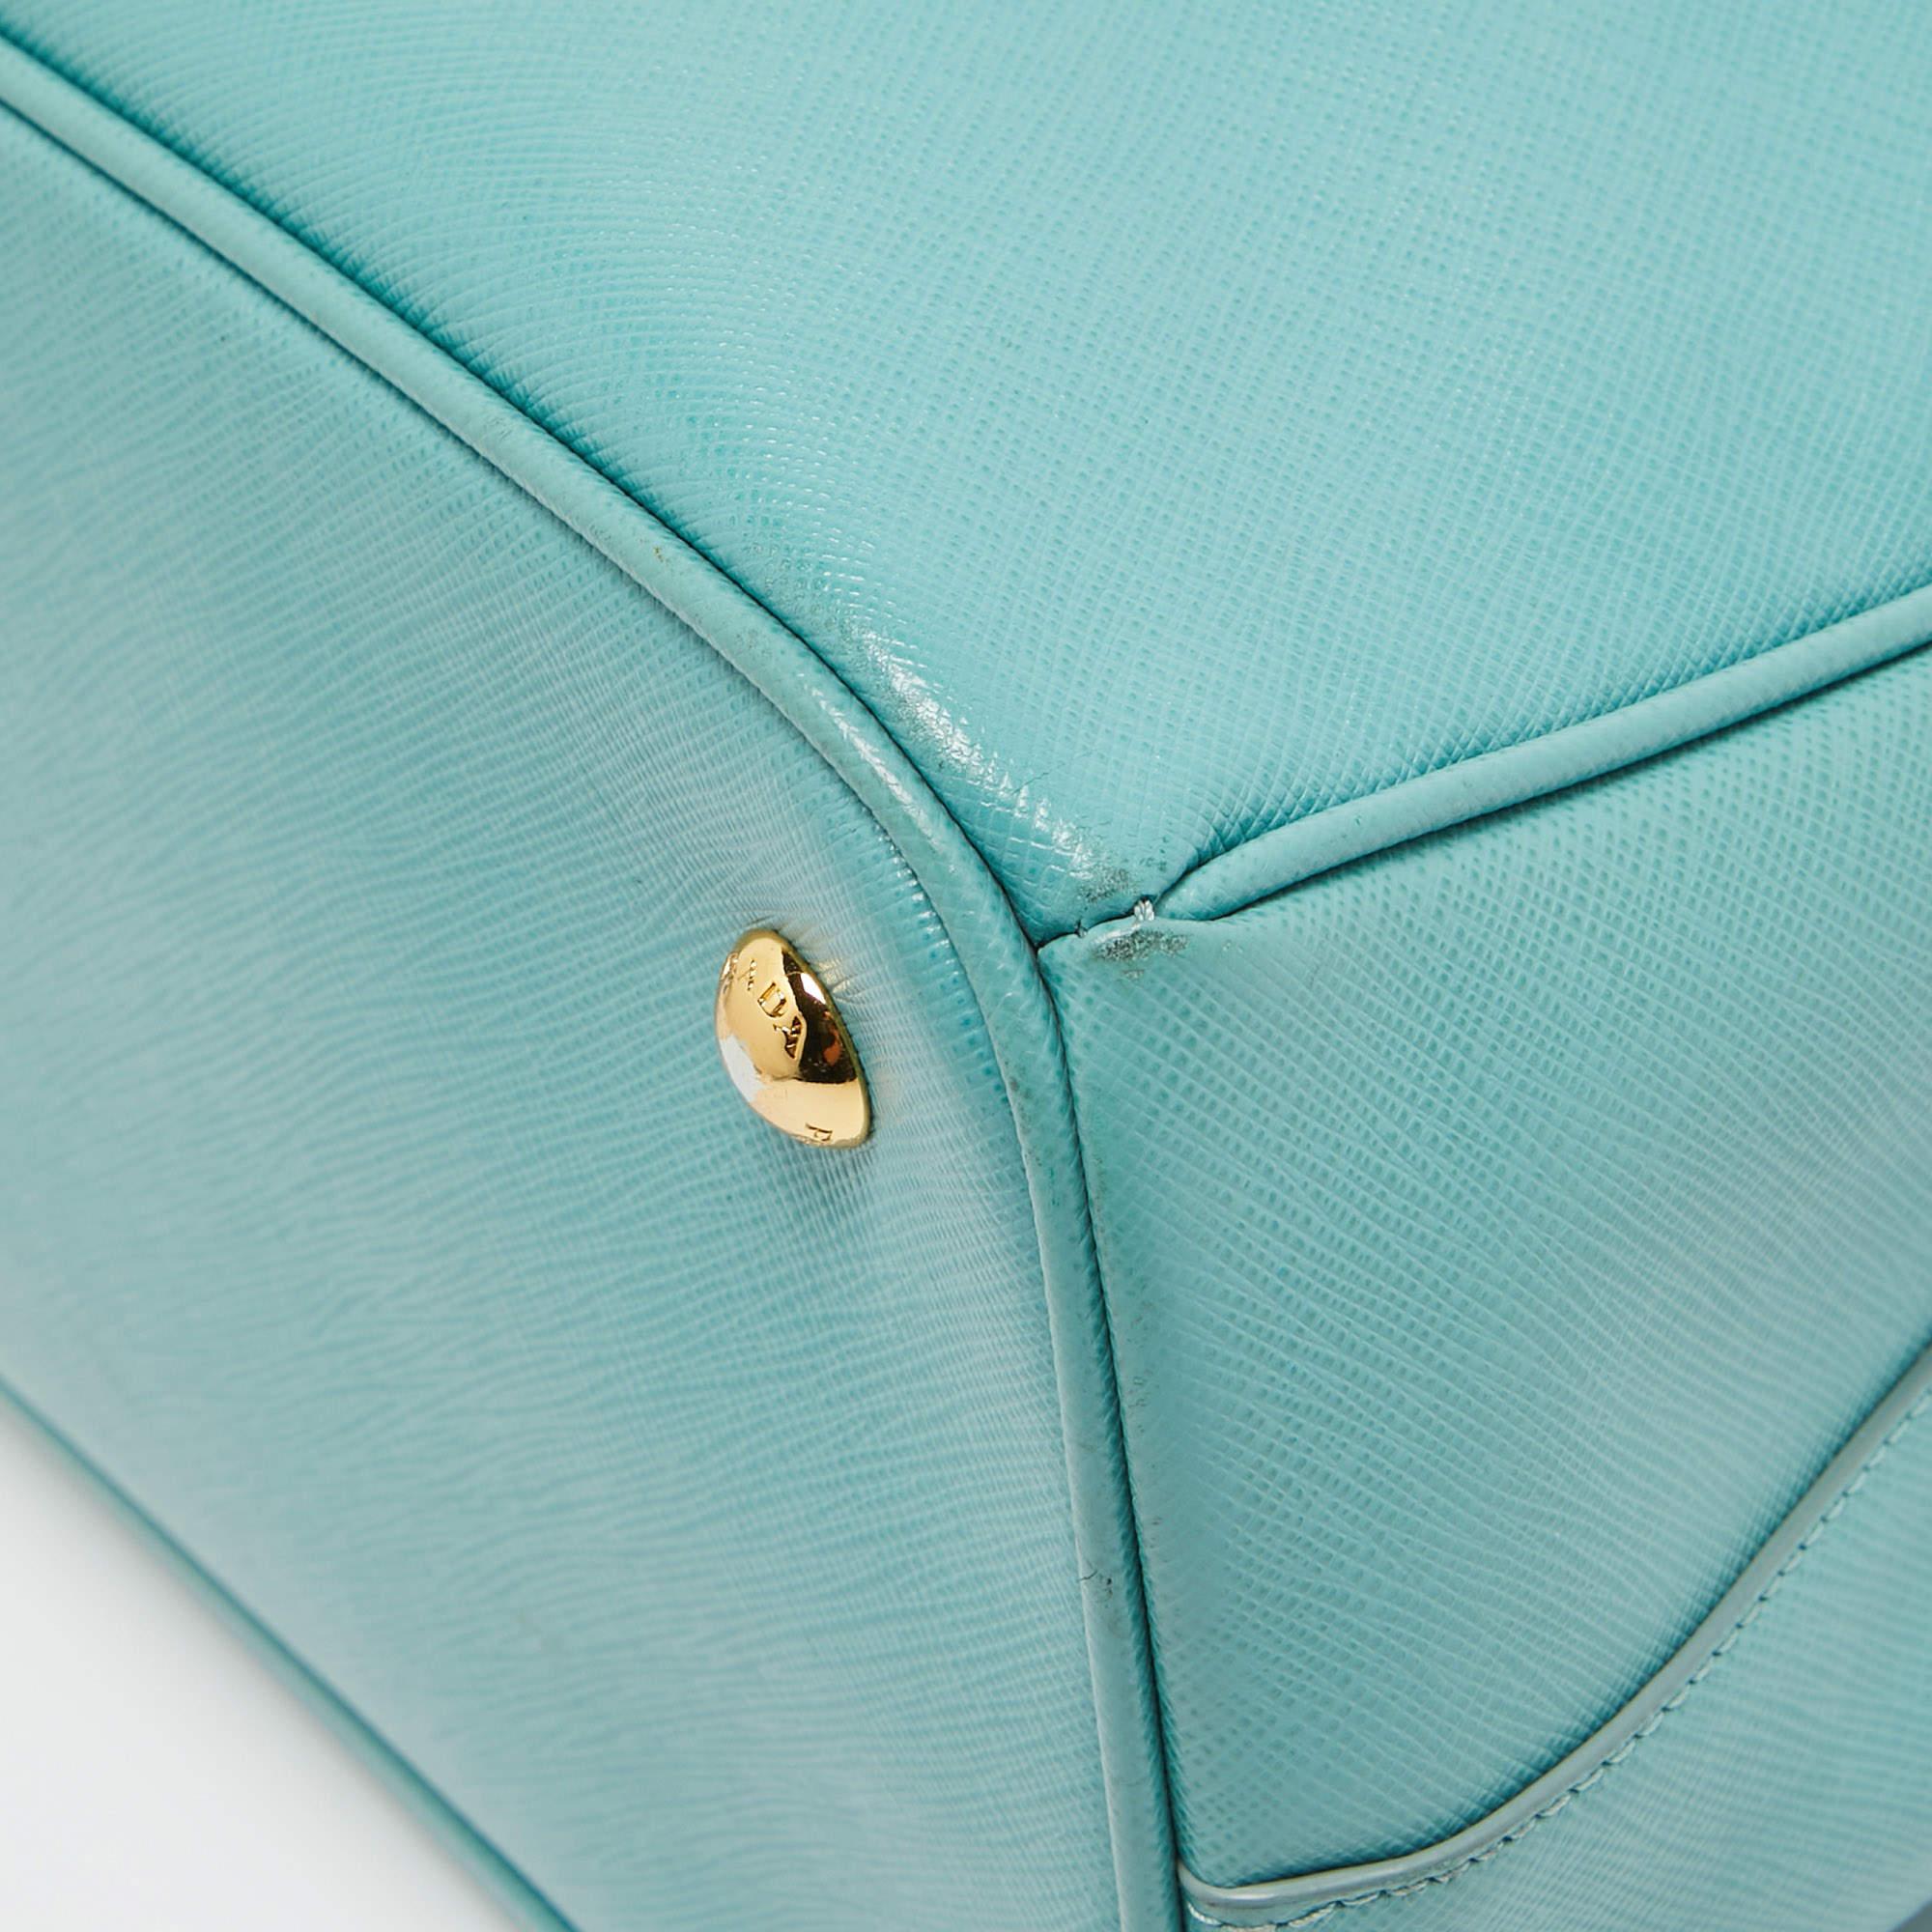 Prada Turquoise Blue Saffiano Leather Medium Middle Zip Tote For Sale 8